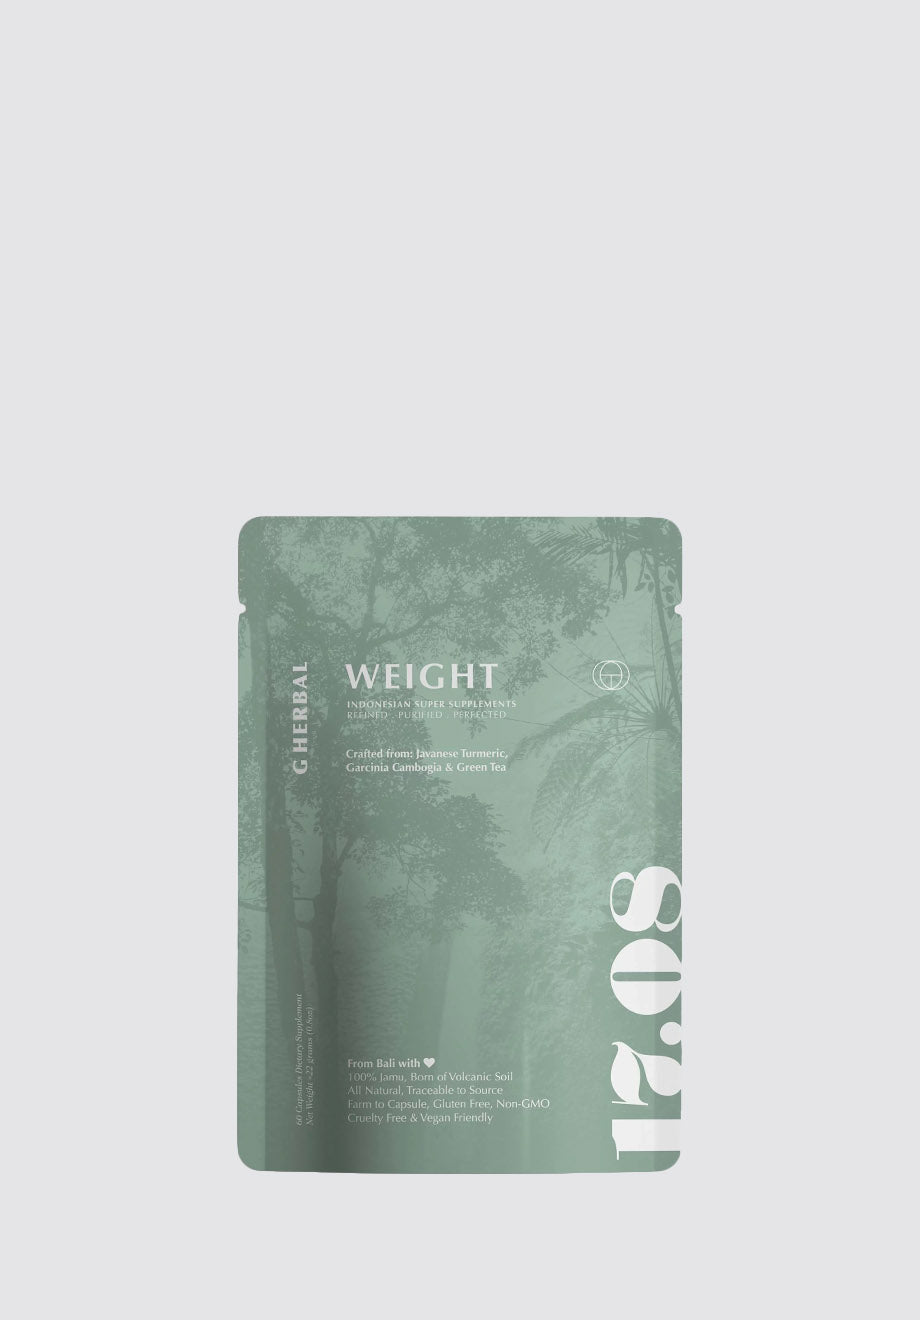 WEIGHT by G Herbal